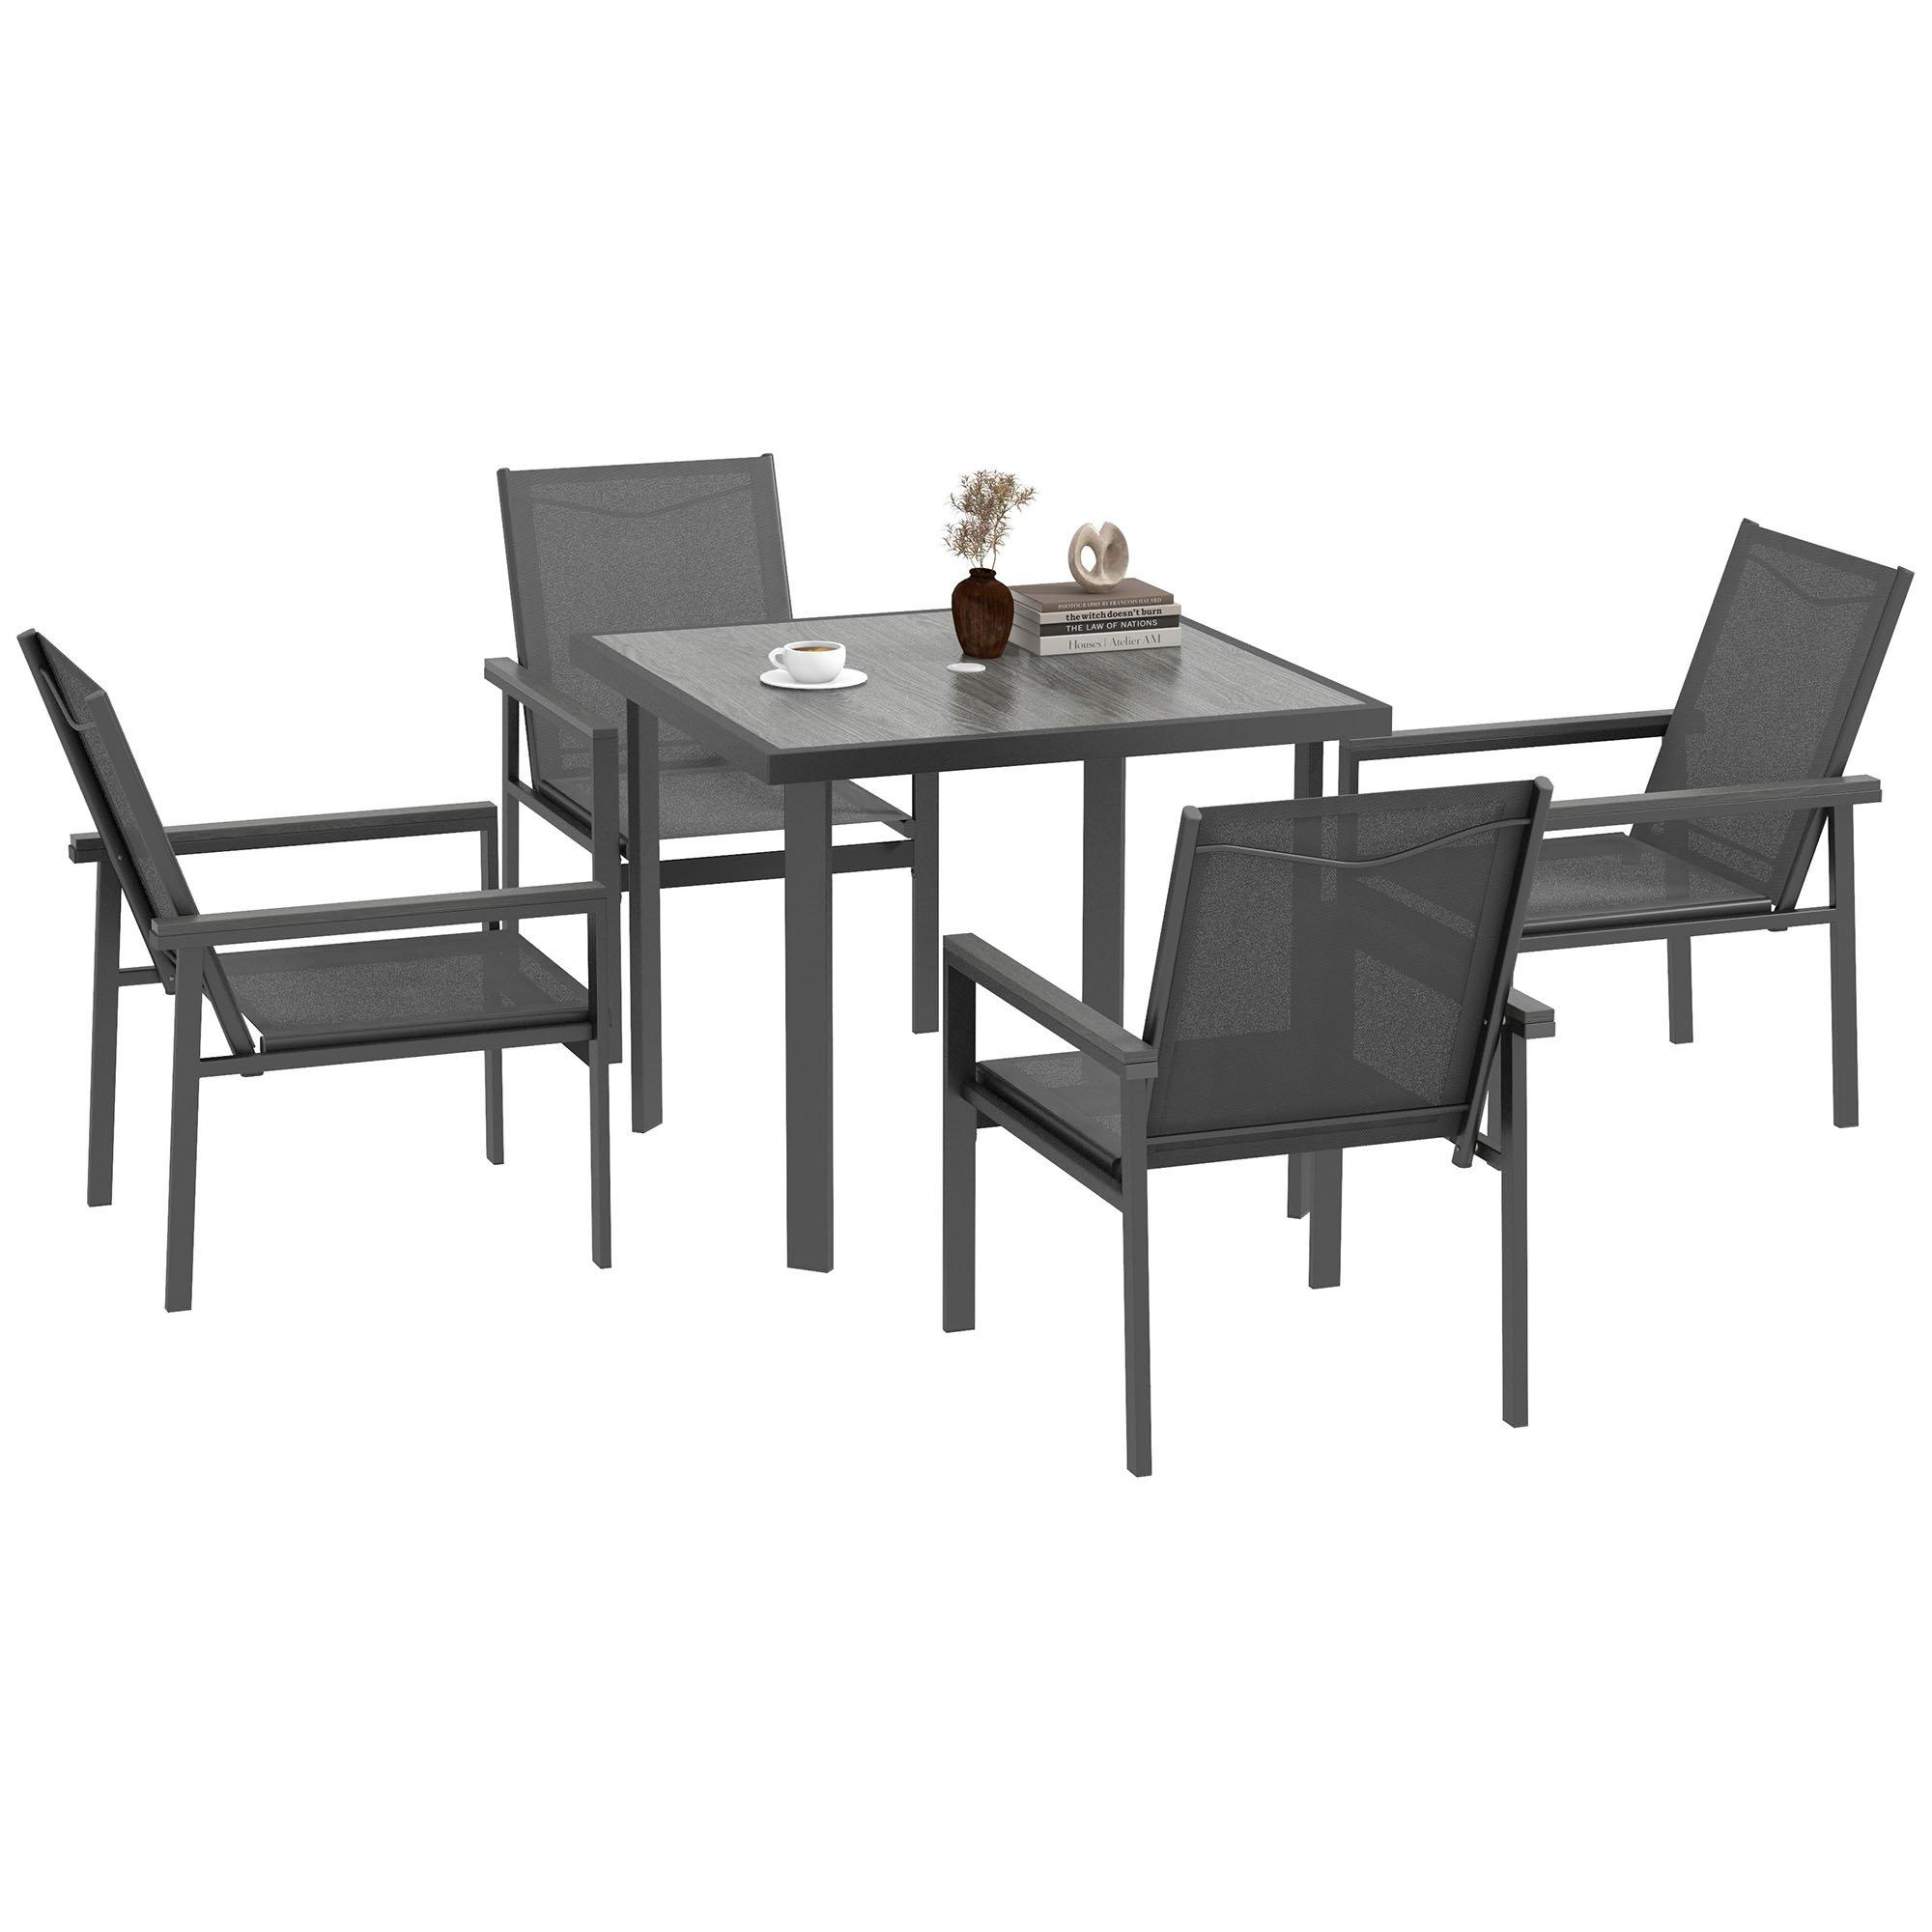 5 Pieces Outdoor Dining Table and 4 Armchairs, Garden Dining Set, Grey